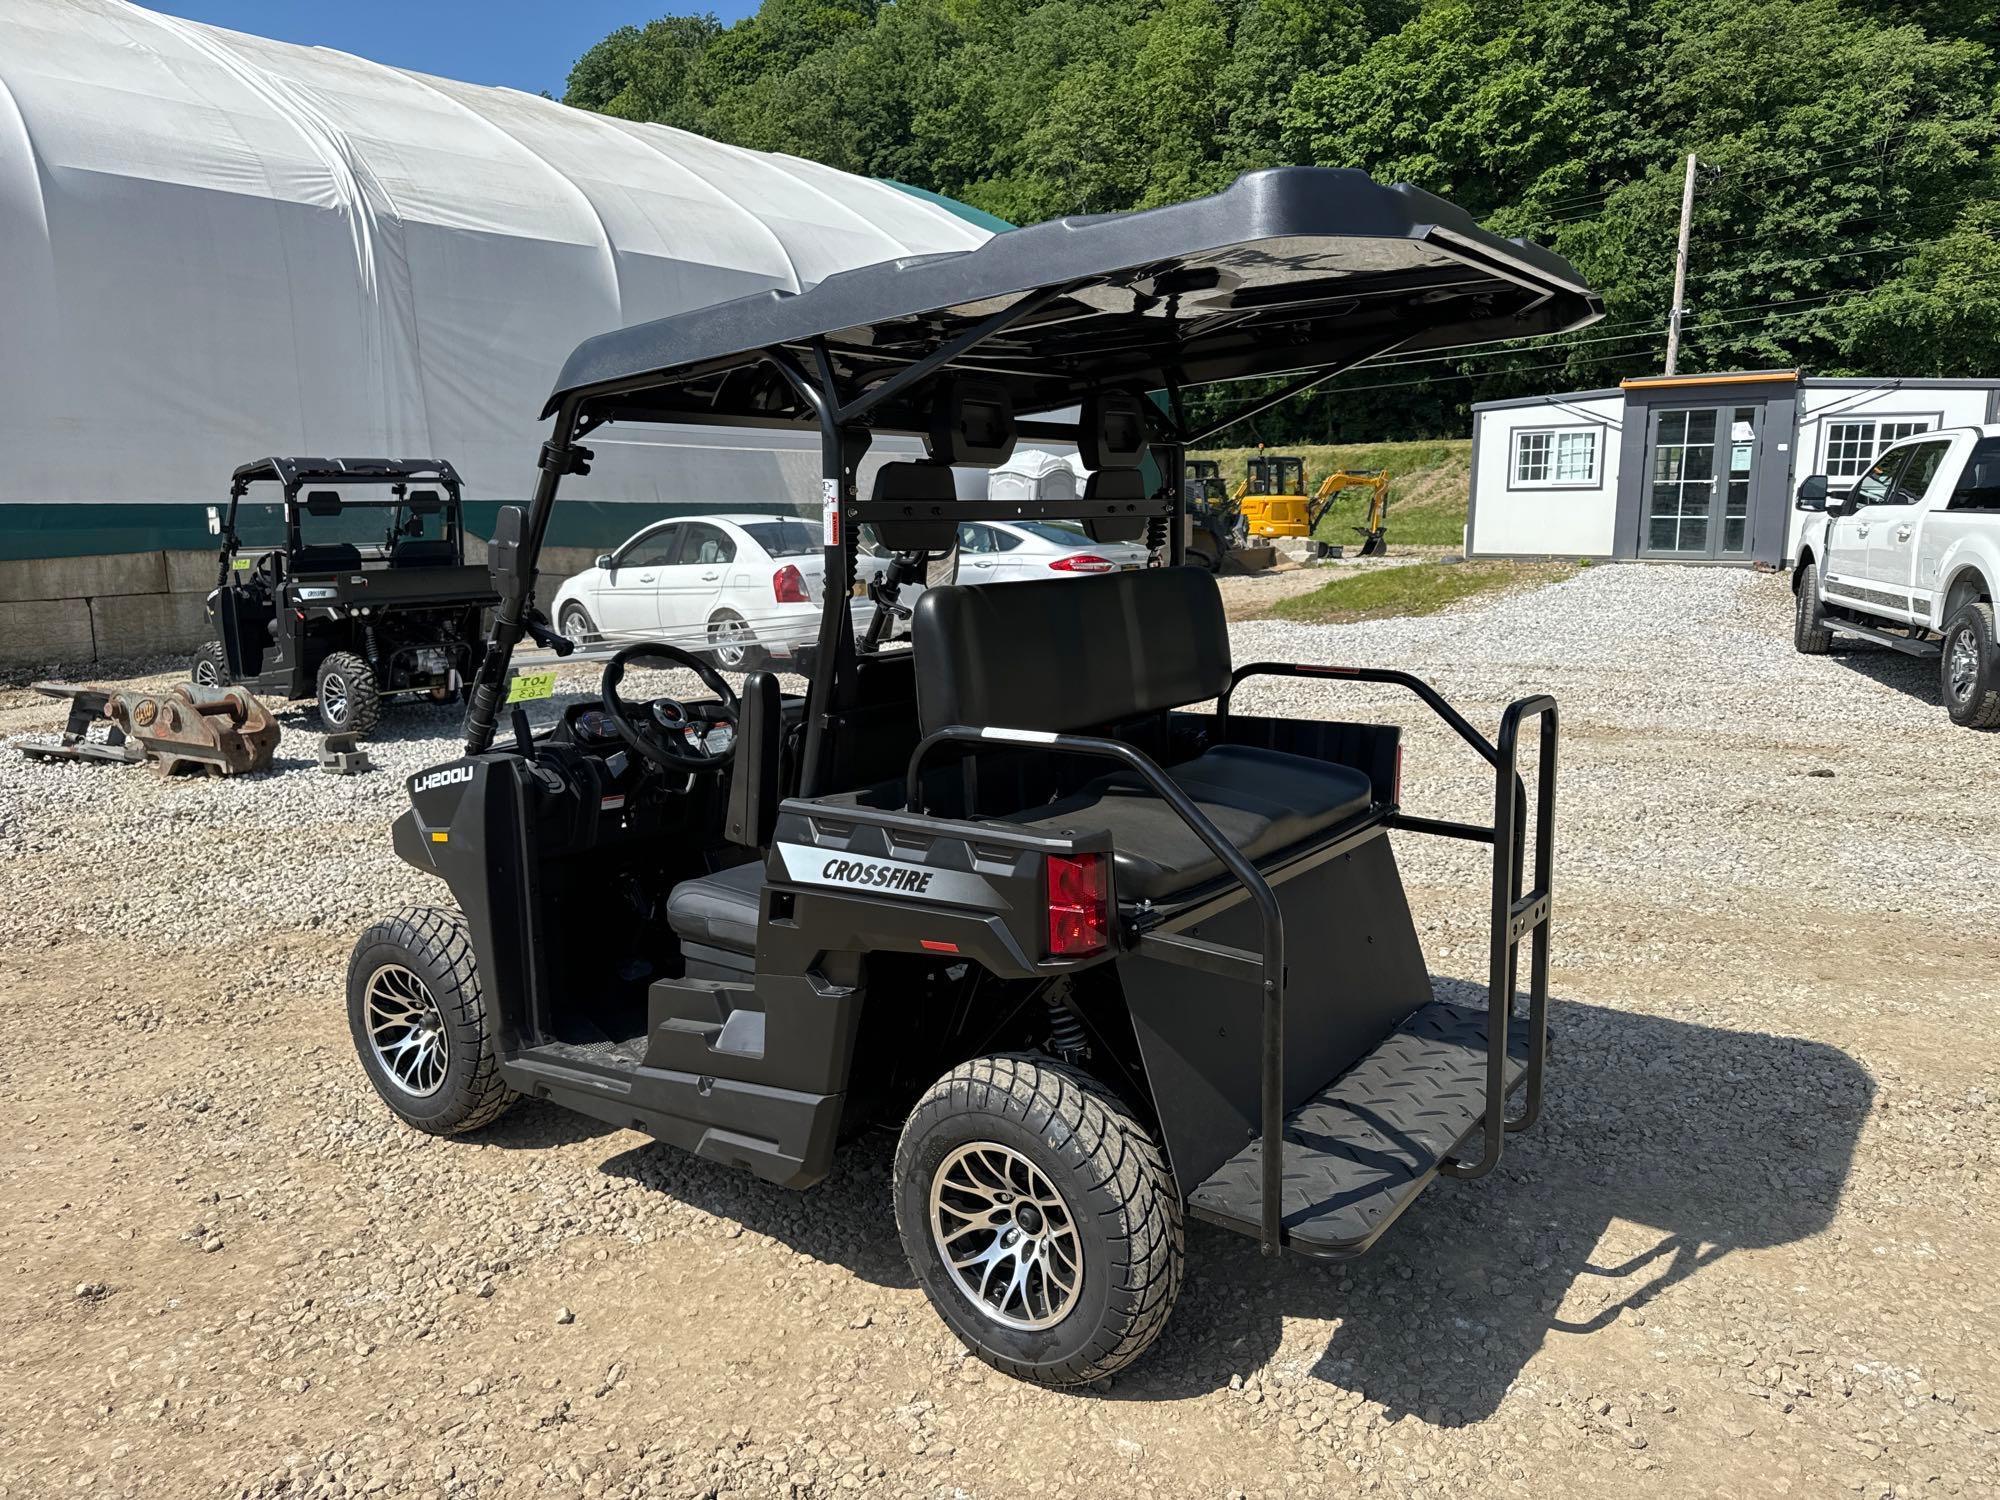 NEW UNUSED CROSSFIRE LH200U UTILITY VEHICLE powered by 177CC EFI gas engine, equipped with ROPS,